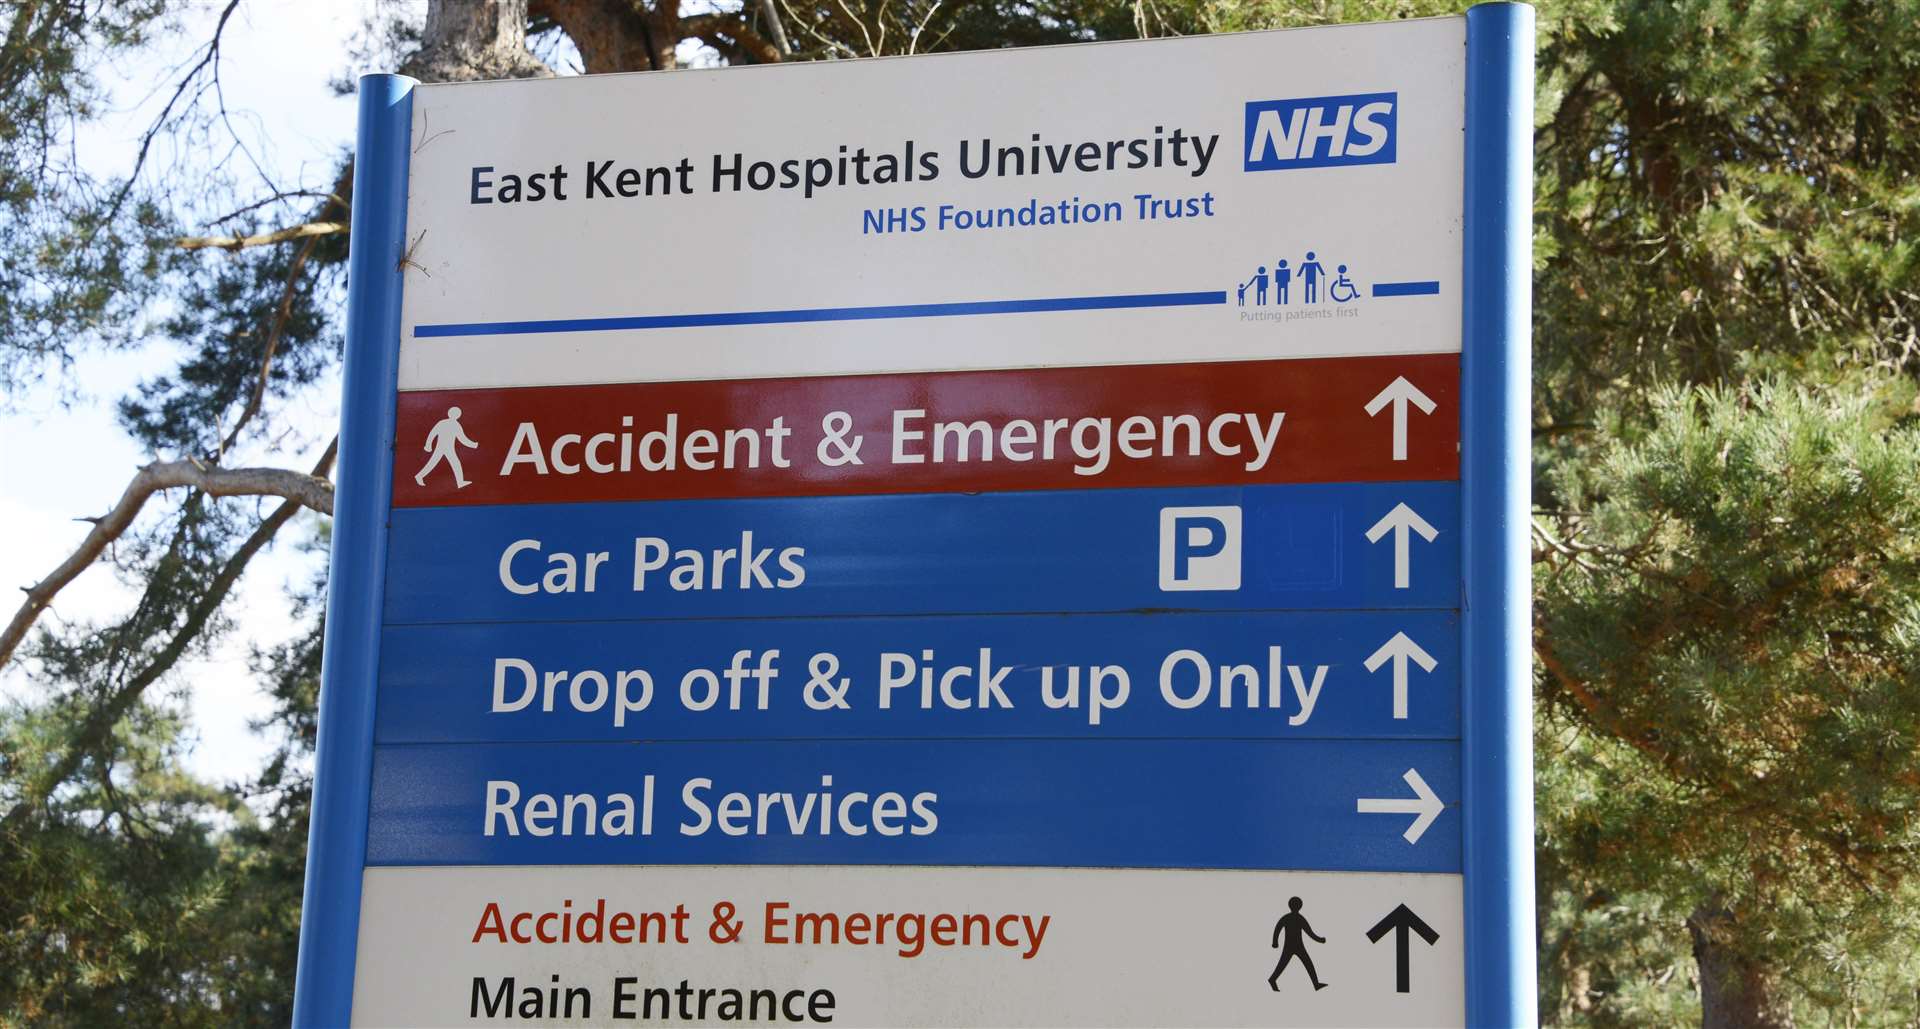 The East Kent Trust has five sites including William Harvey, QEQM and Kent & Canterbury